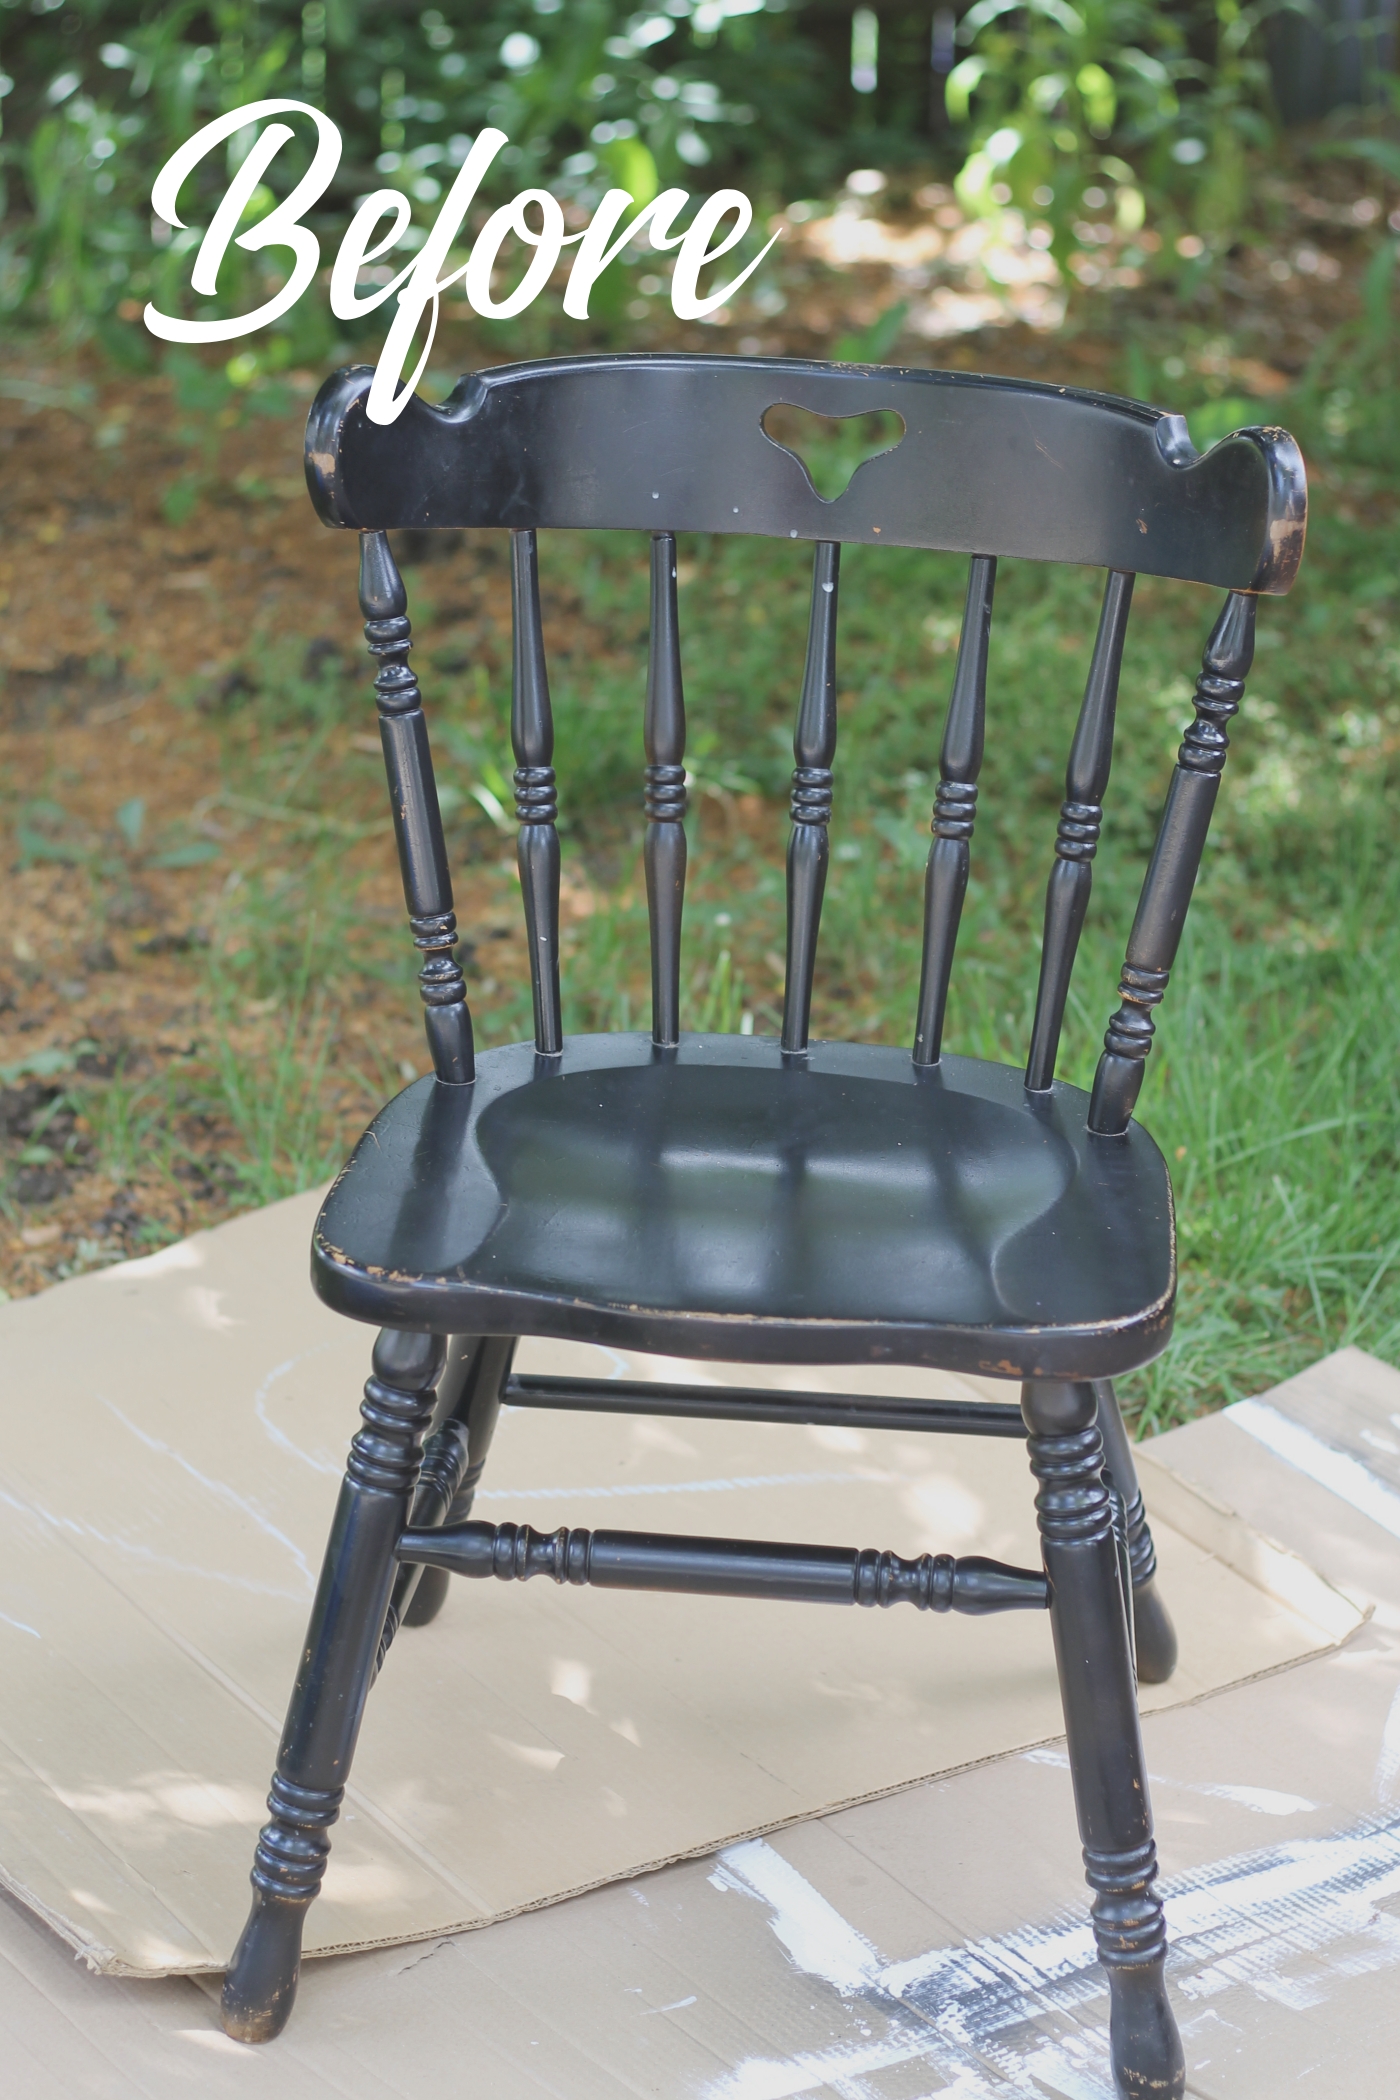 Furniture Makeover: Spray Painting Wood Chairs  Painted wood chairs, Spray  paint wood, Painted wooden chairs